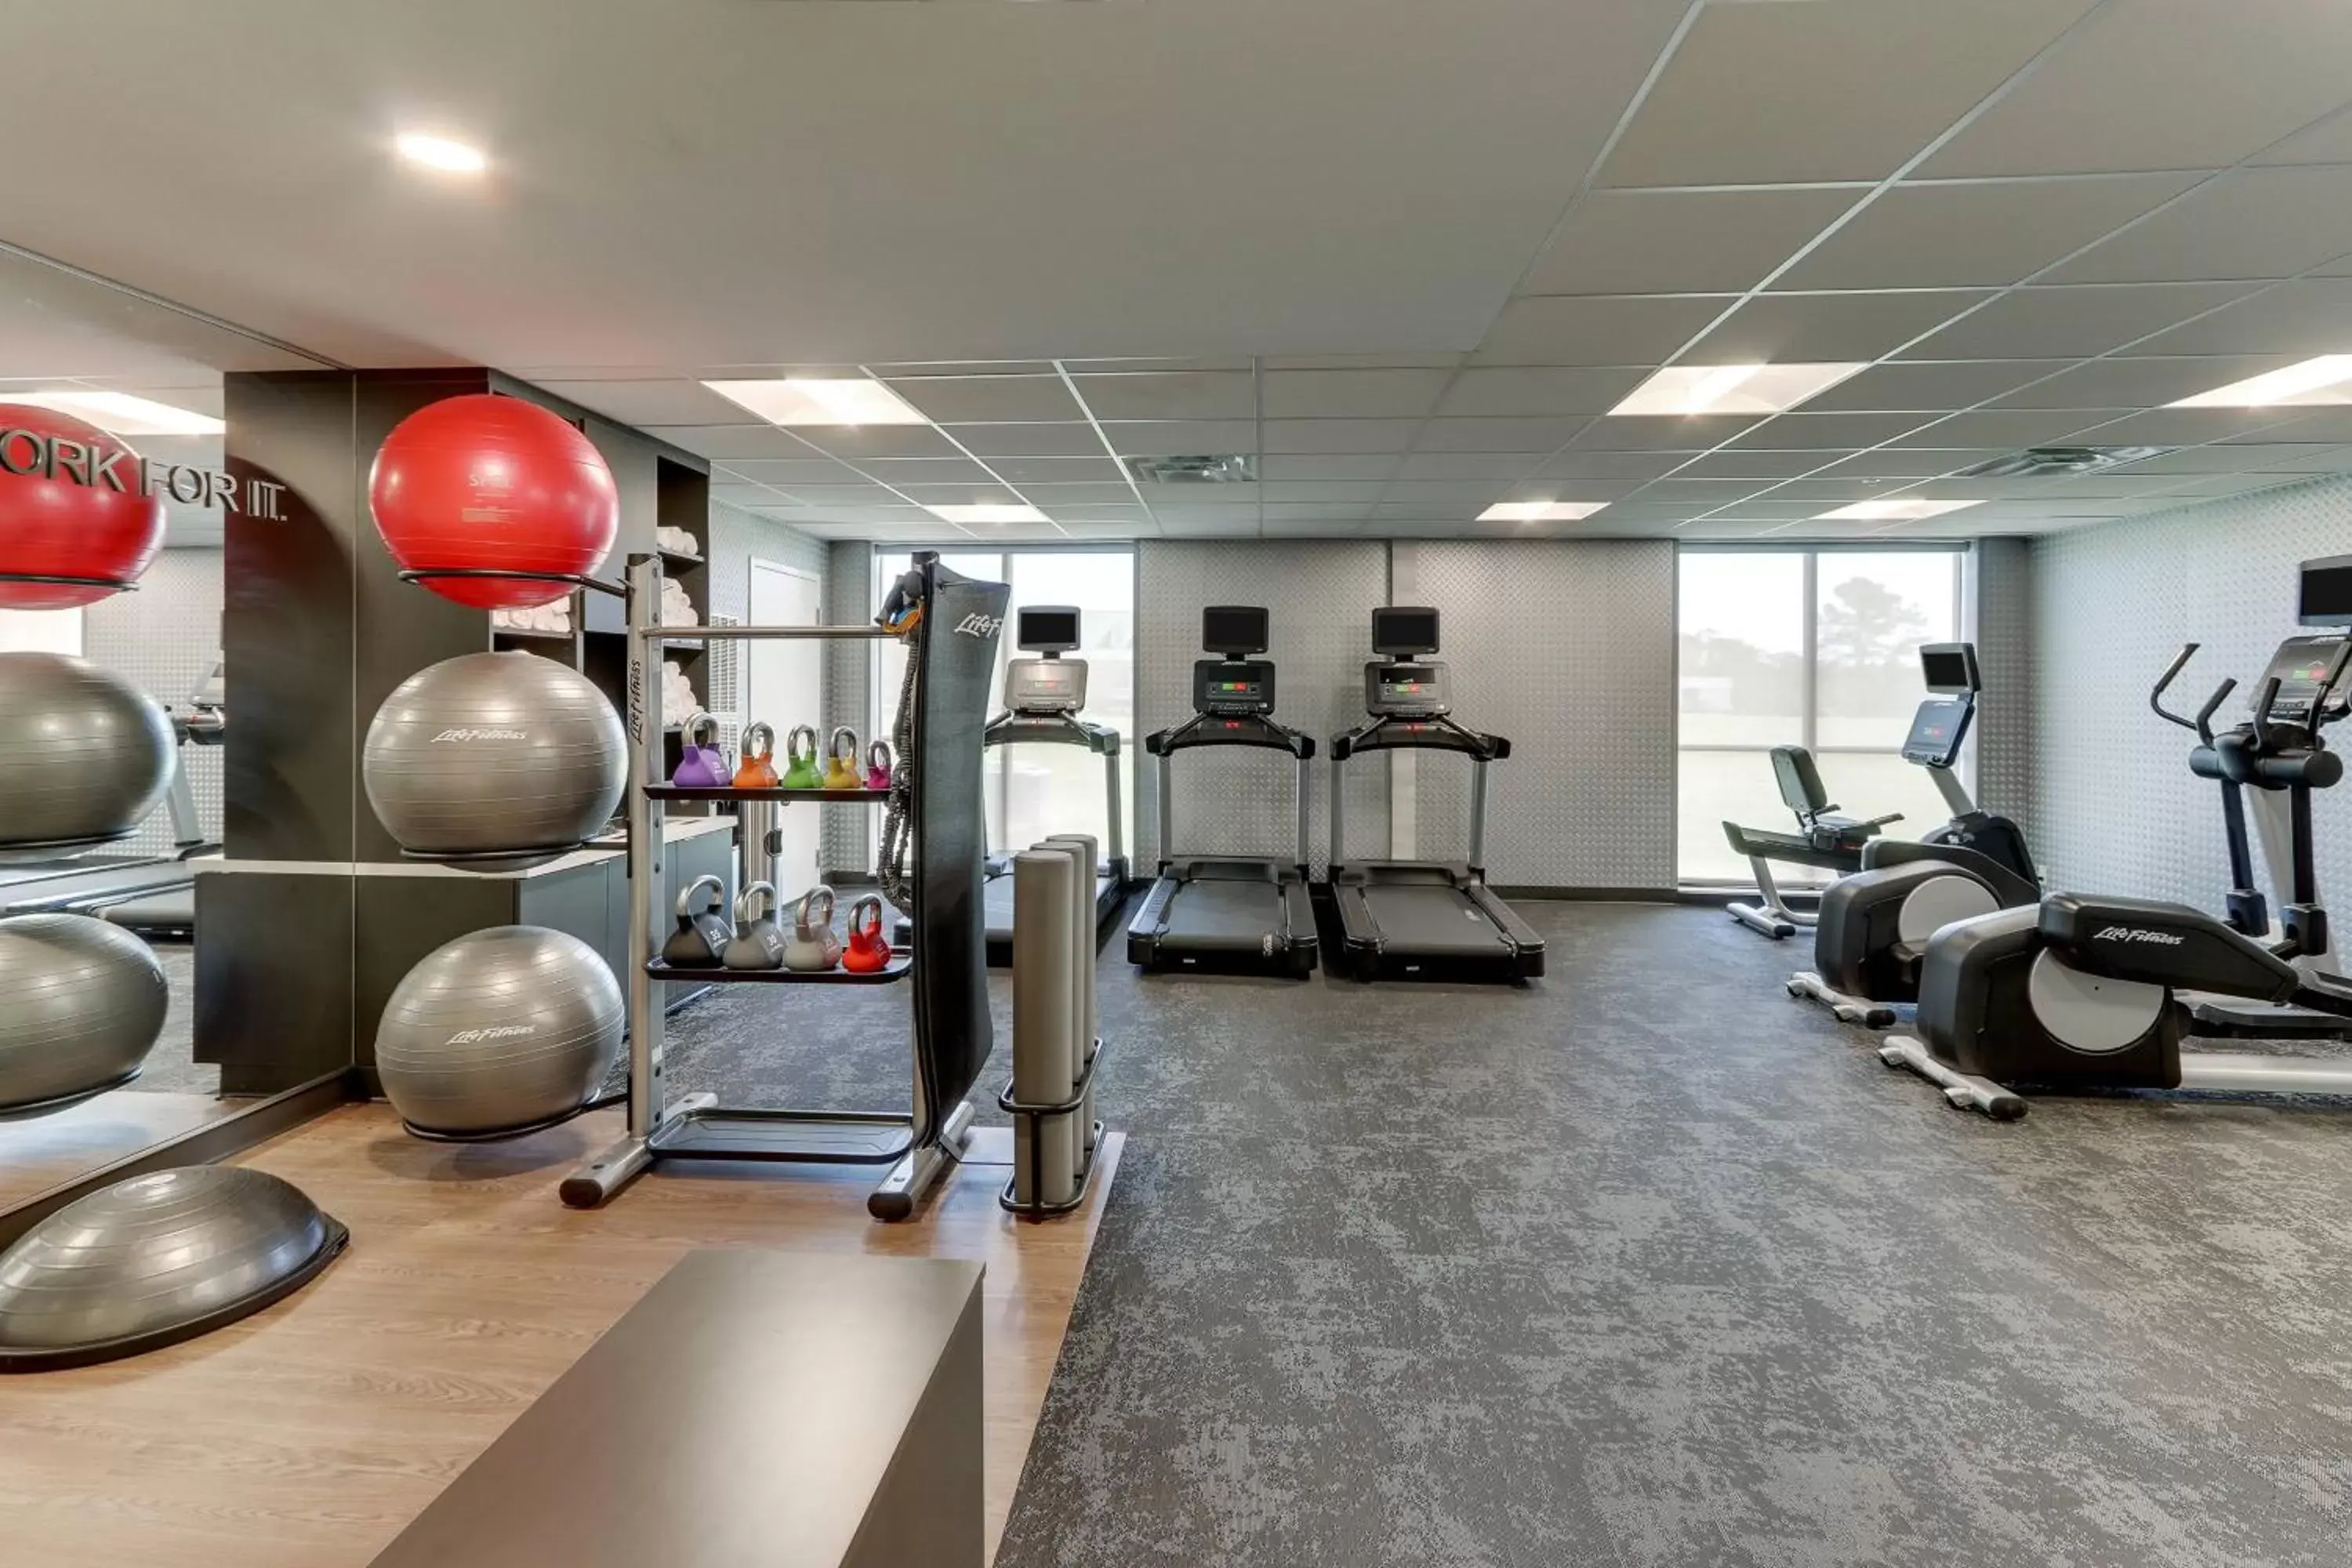 Fitness centre/facilities, Fitness Center/Facilities in Fairfield Inn & Suites Southport